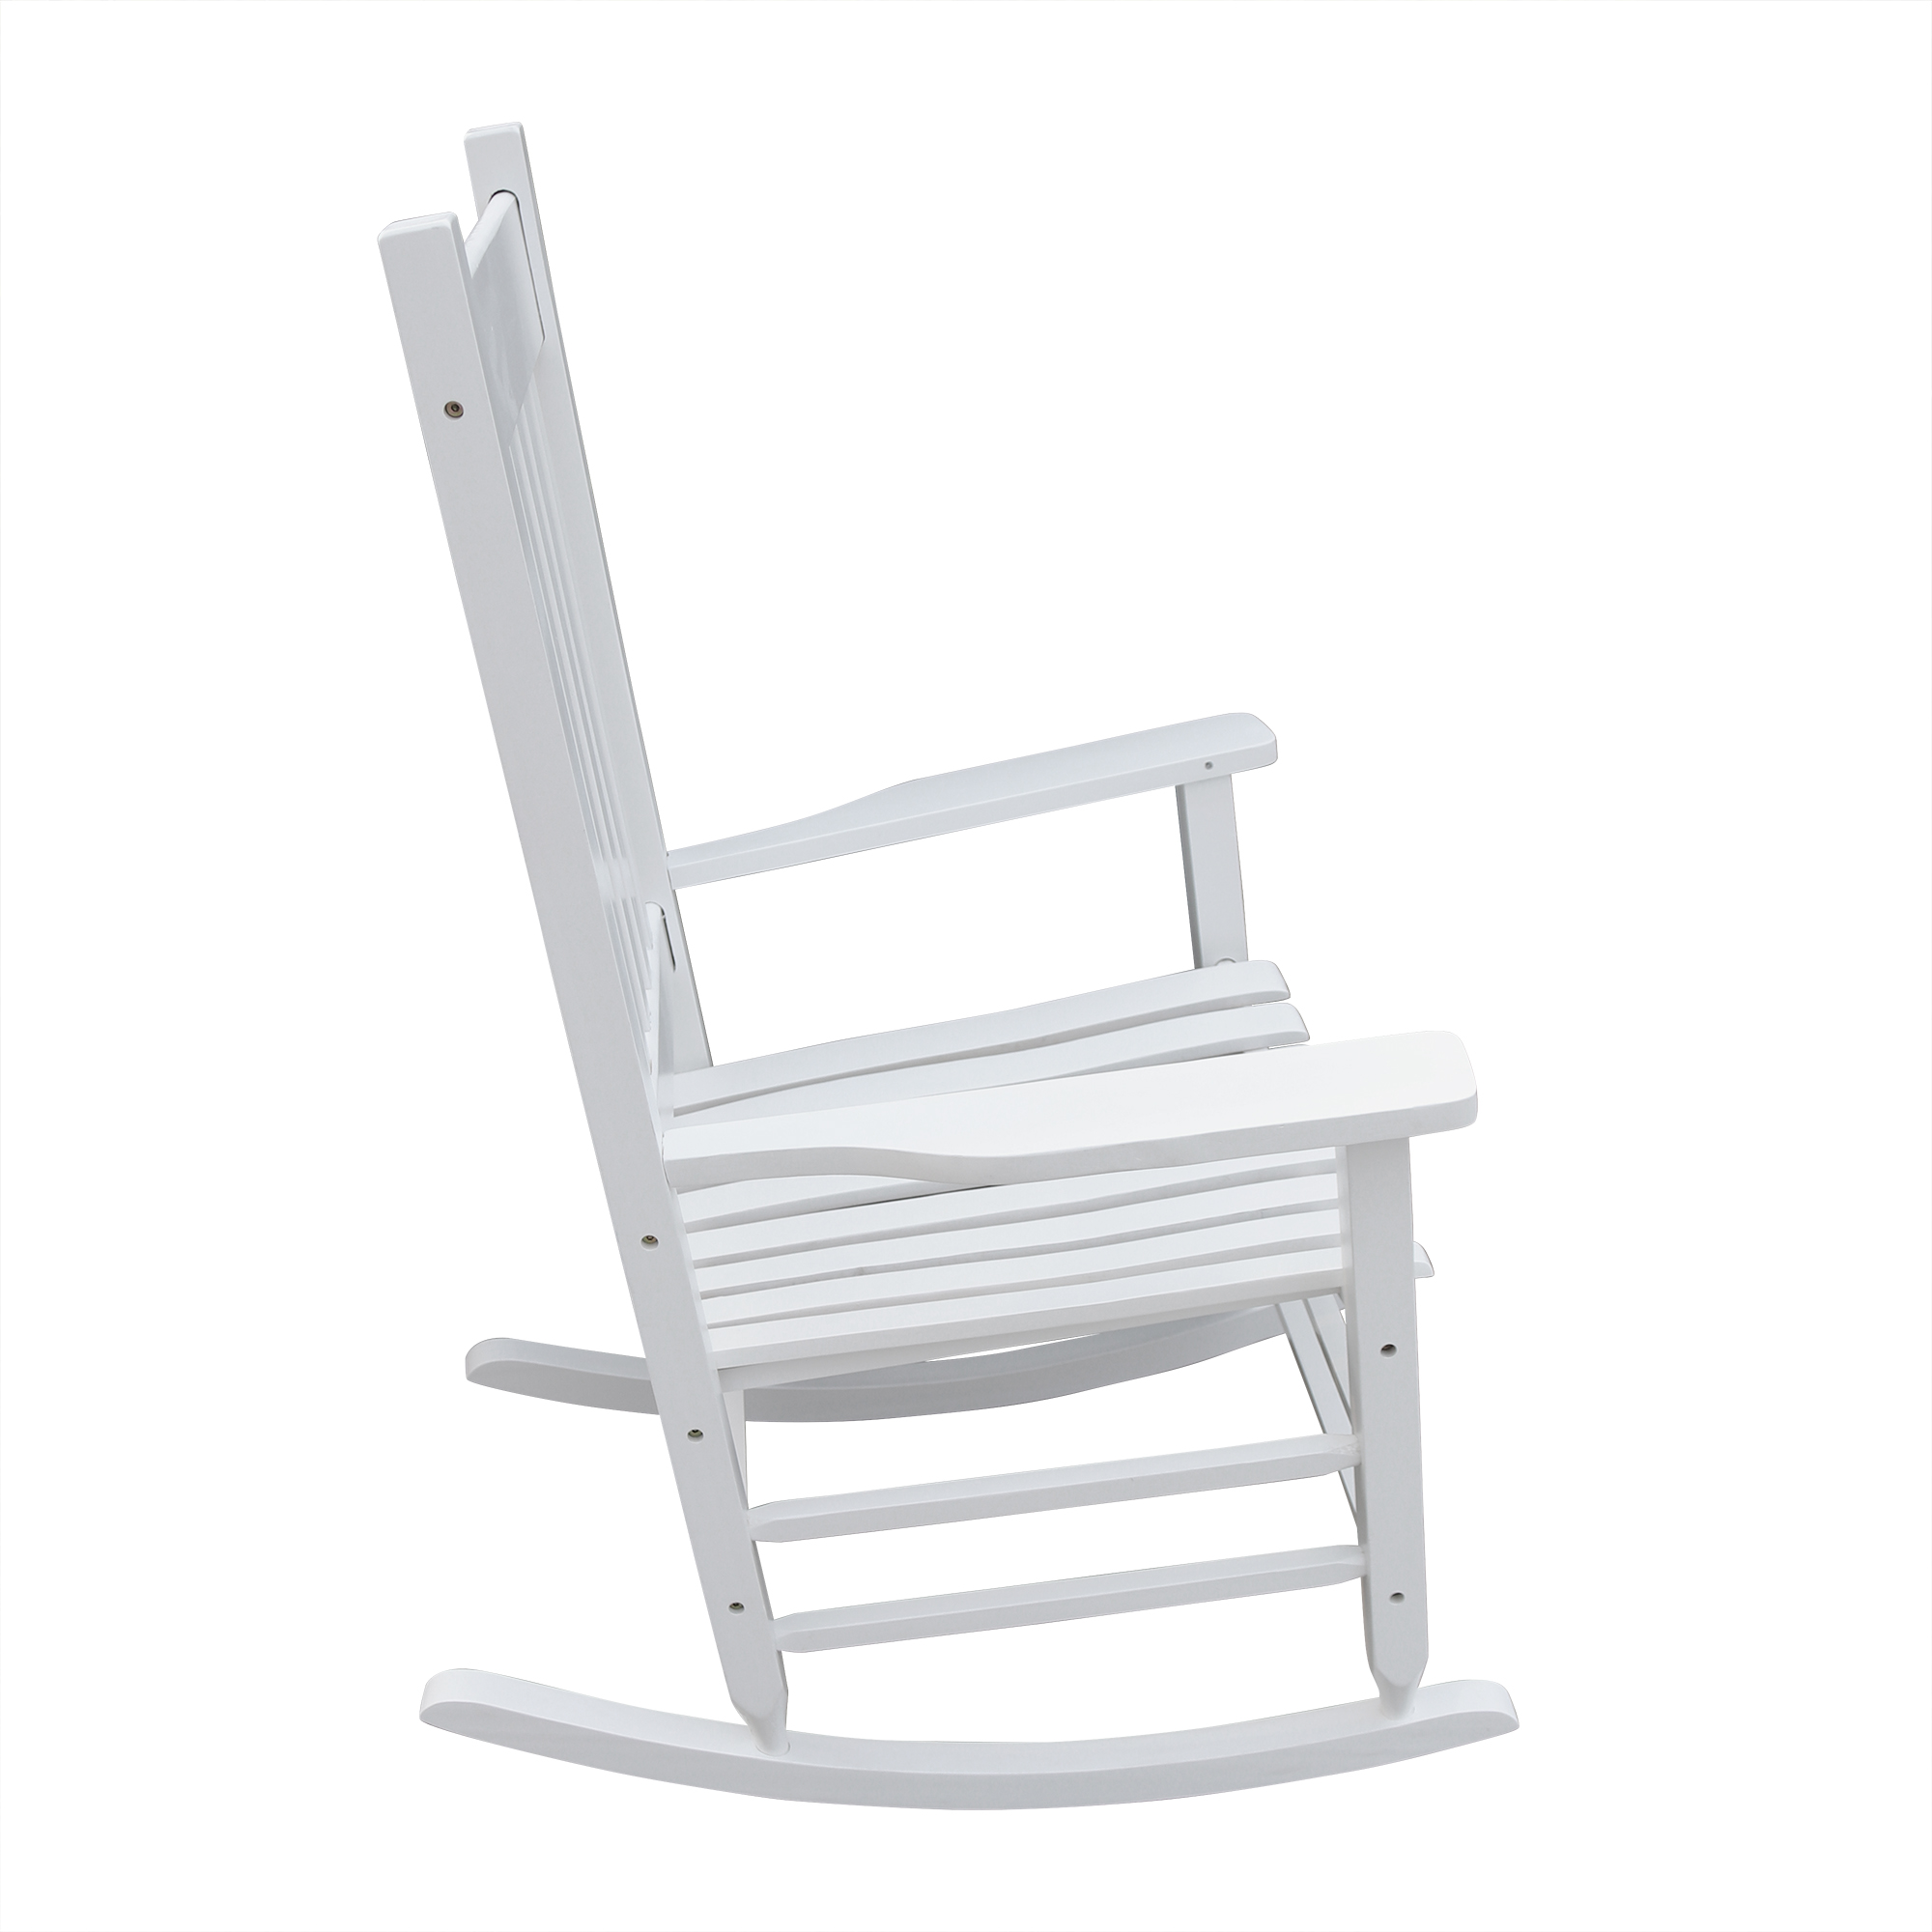 Rocking Chair for Outdoor, Wooden Patio Porch Rocker Chair with Back Support, Ergonomic Wooden Rocking Chair for Patio Porch Backyard, Rocking Bistro Chair Patio Chairs, Max 280lbs, White, A1602 - image 4 of 7